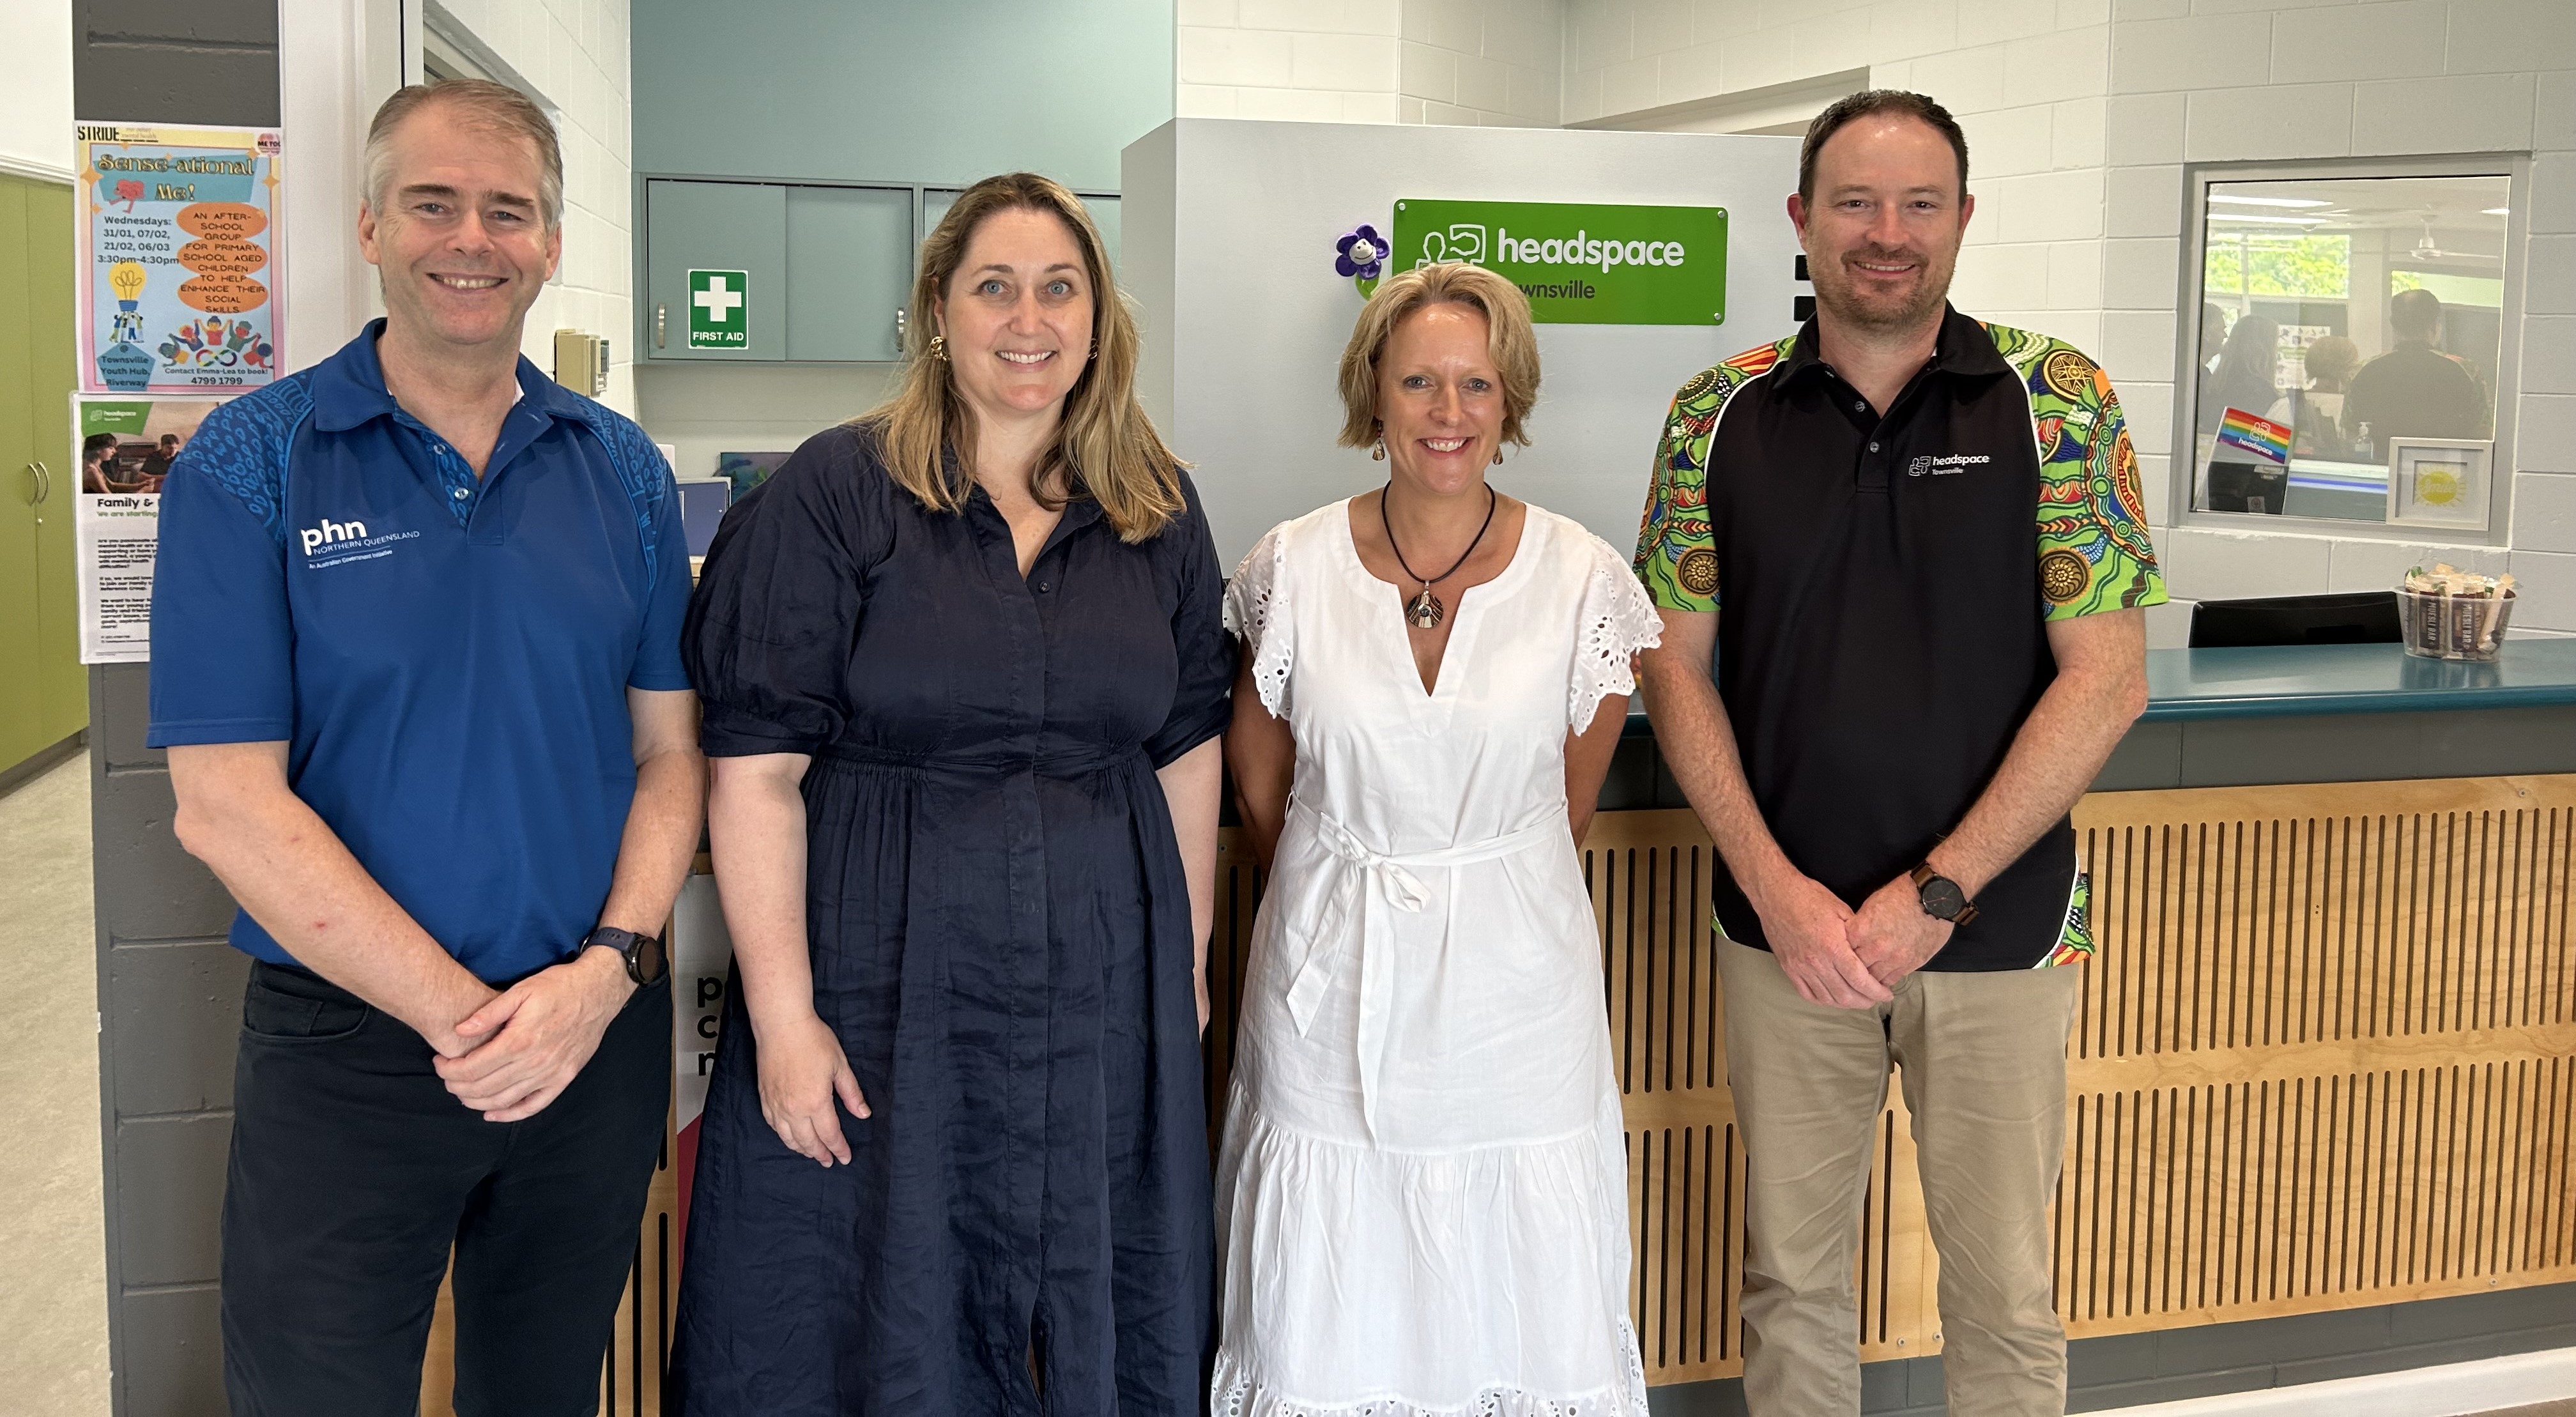 NQPHN CEO Sean Rooney, Assistant Minister for Mental Health and Suicide Prevention and Assistant Minister for Rural and Regional Health, the Hon Emma McBride MP, NQPHN Executive Director Health Services Commissioning Ruth Azzopardi, and headspace Townsville Centre Manager Steven Brooke